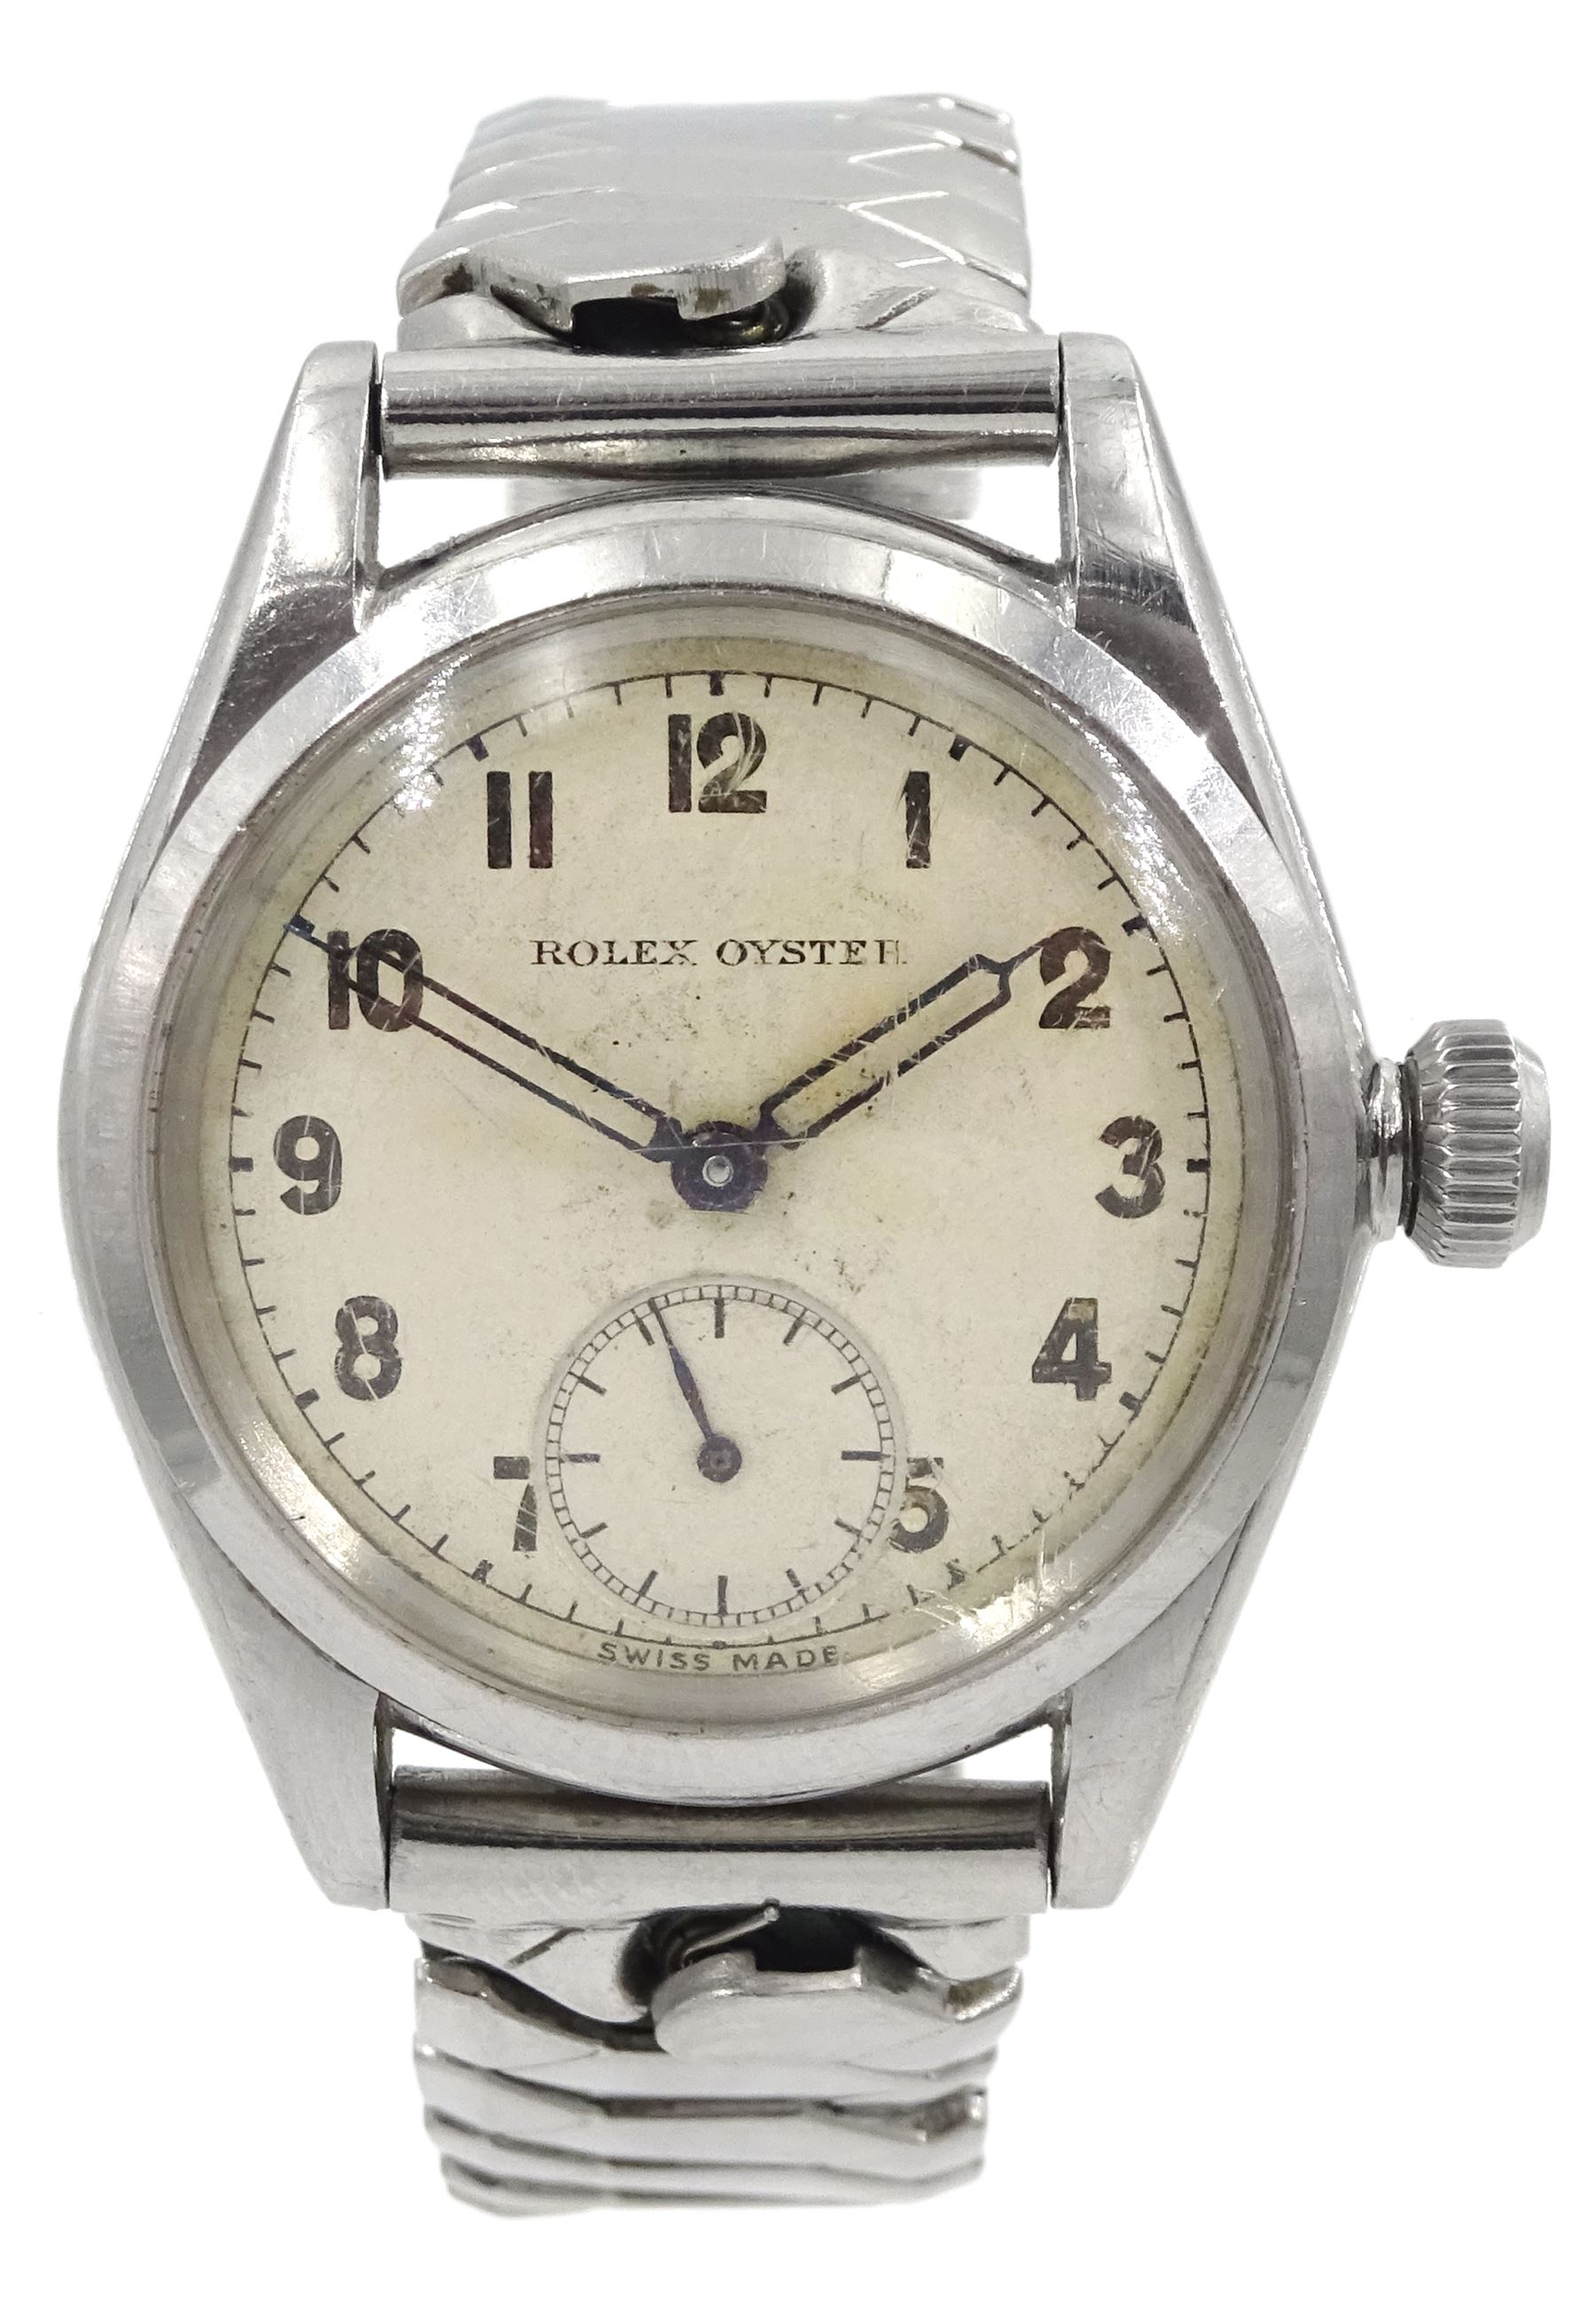 Rolex Oyster stainless steel manual wind wristwatch